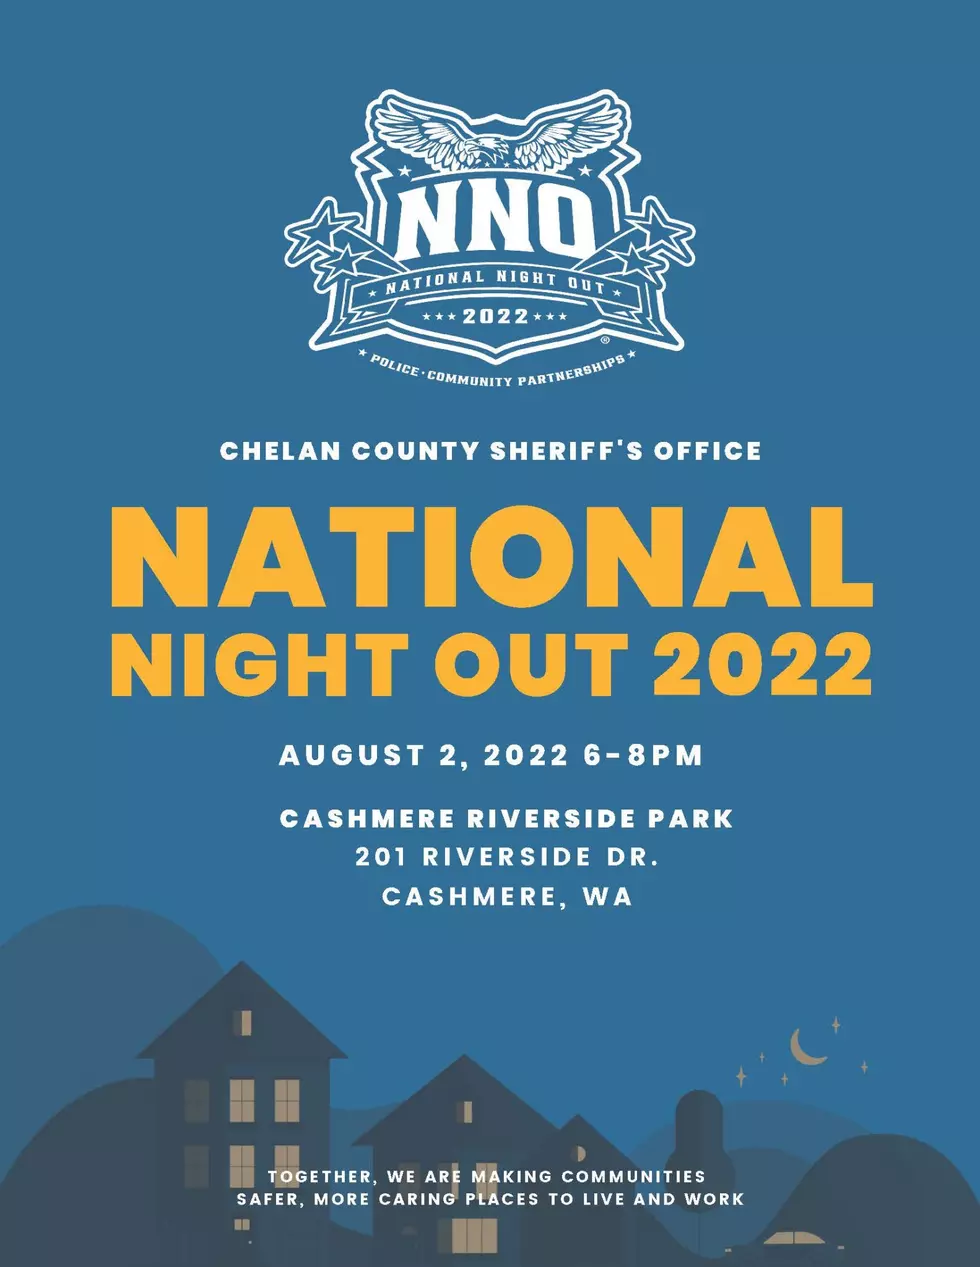 Chelan County Sheriff’s Office Hosts Their Own National Night Out